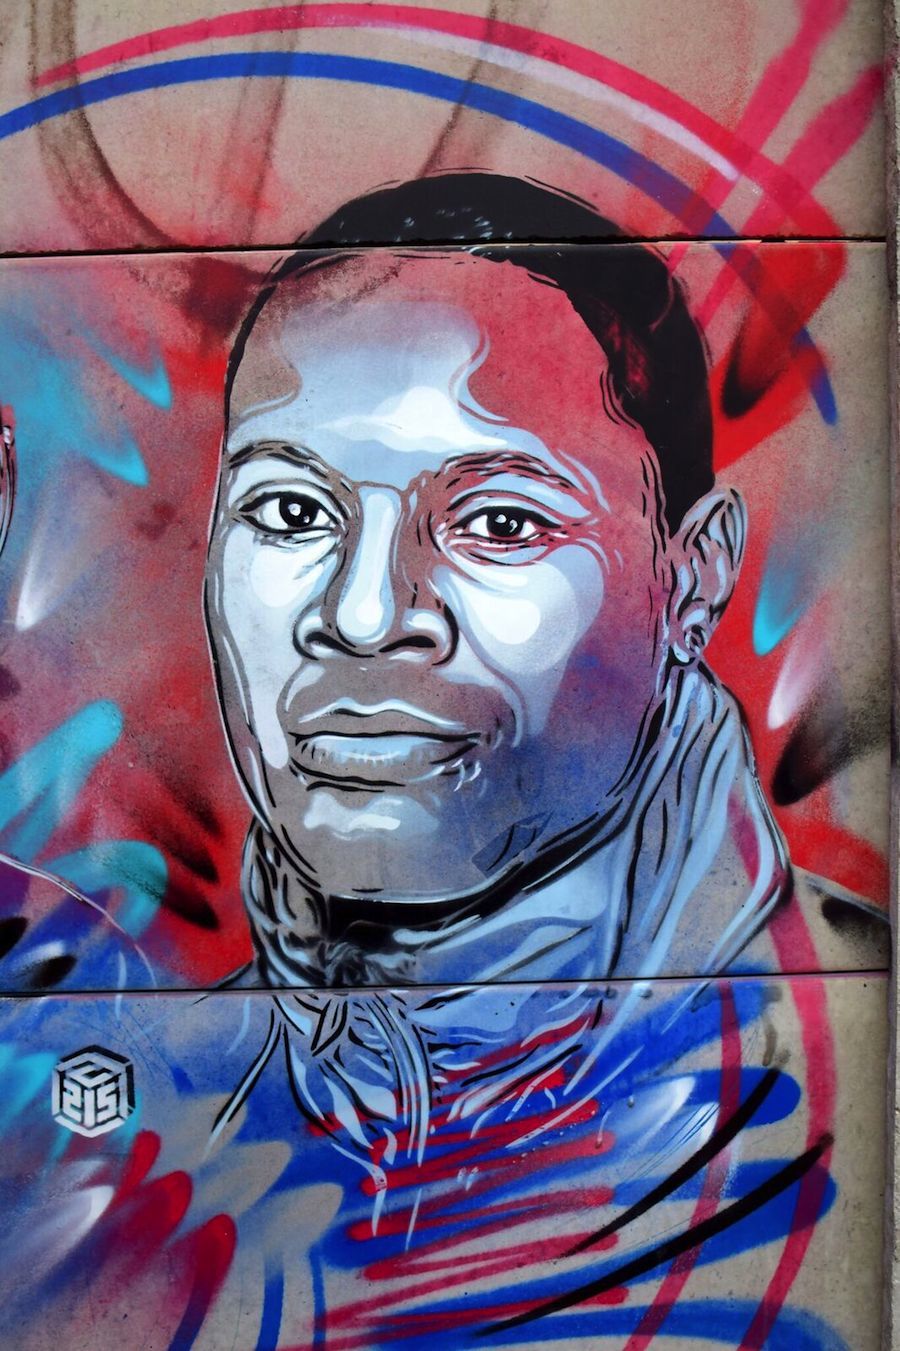 New C215 Exhibition About Athletes in Nice, France-9